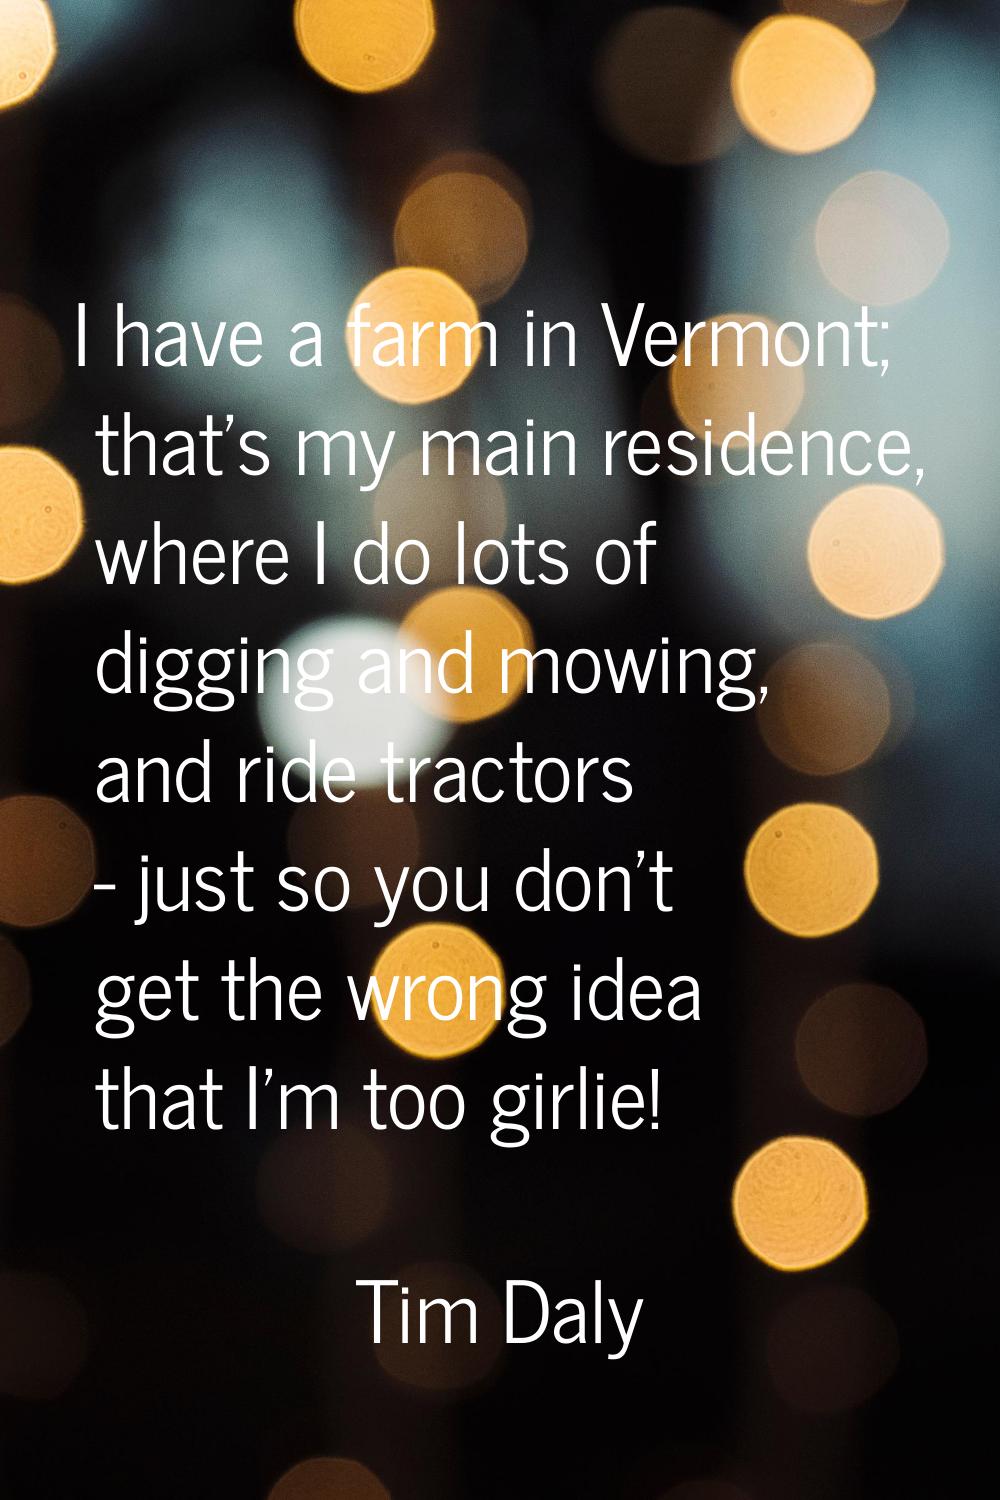 I have a farm in Vermont; that's my main residence, where I do lots of digging and mowing, and ride